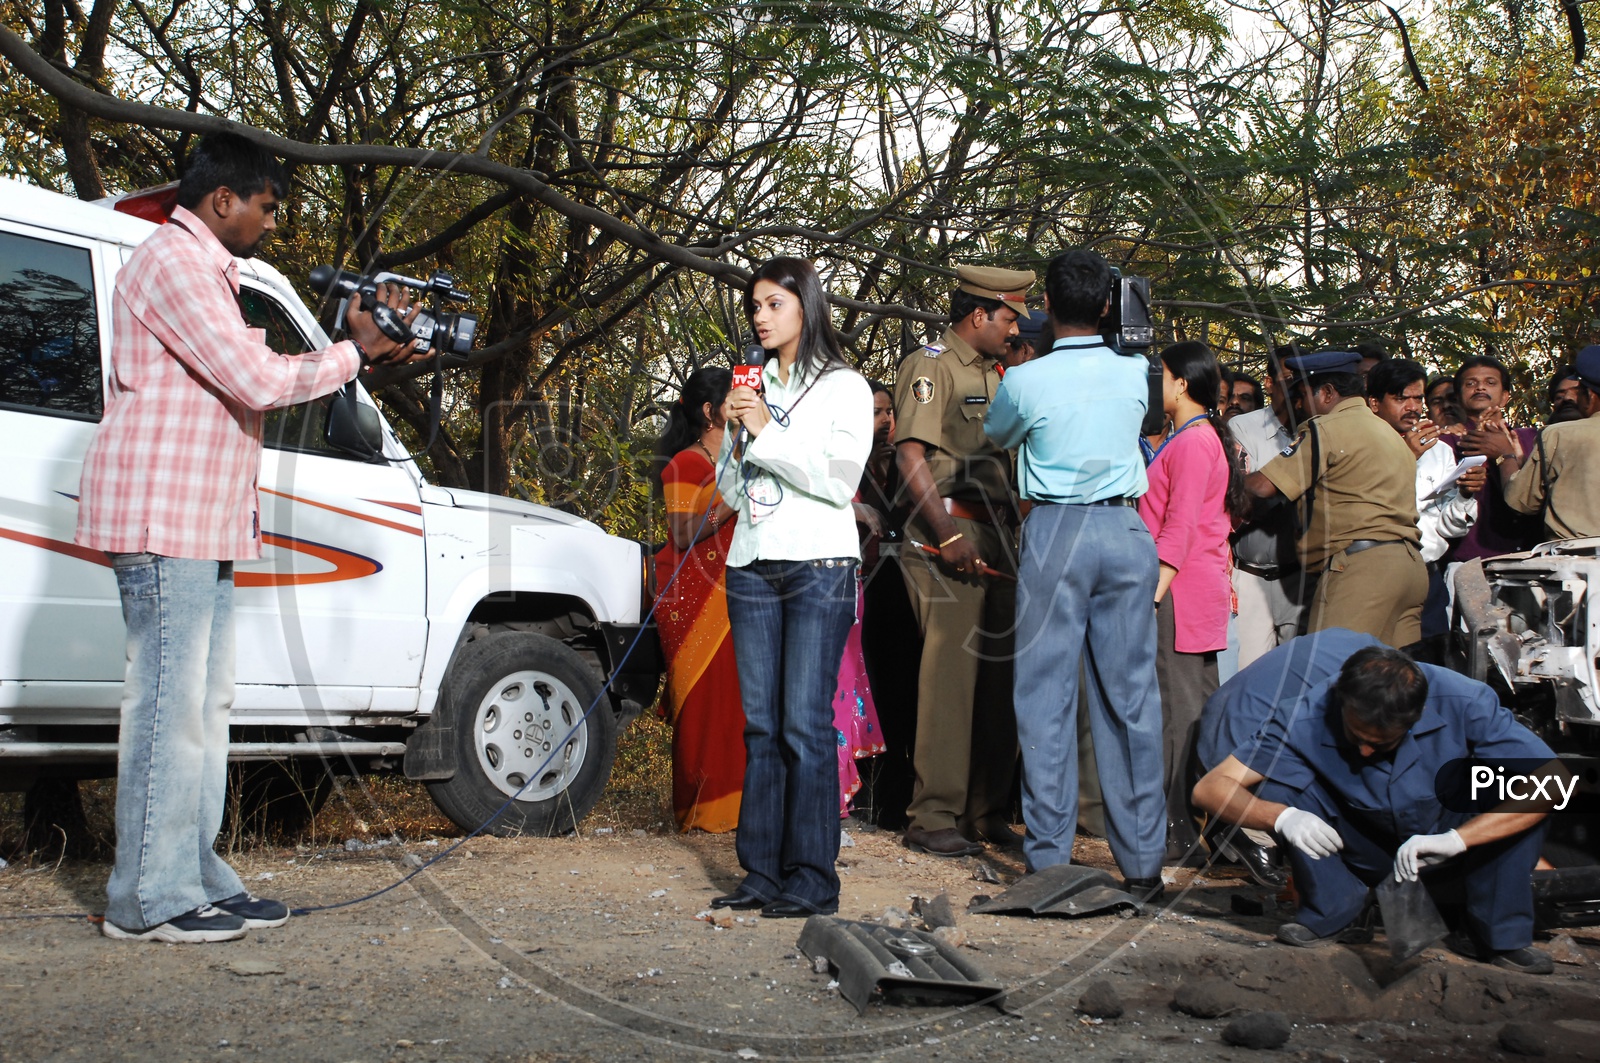 Journalists or Media Channels at a Crime Scene